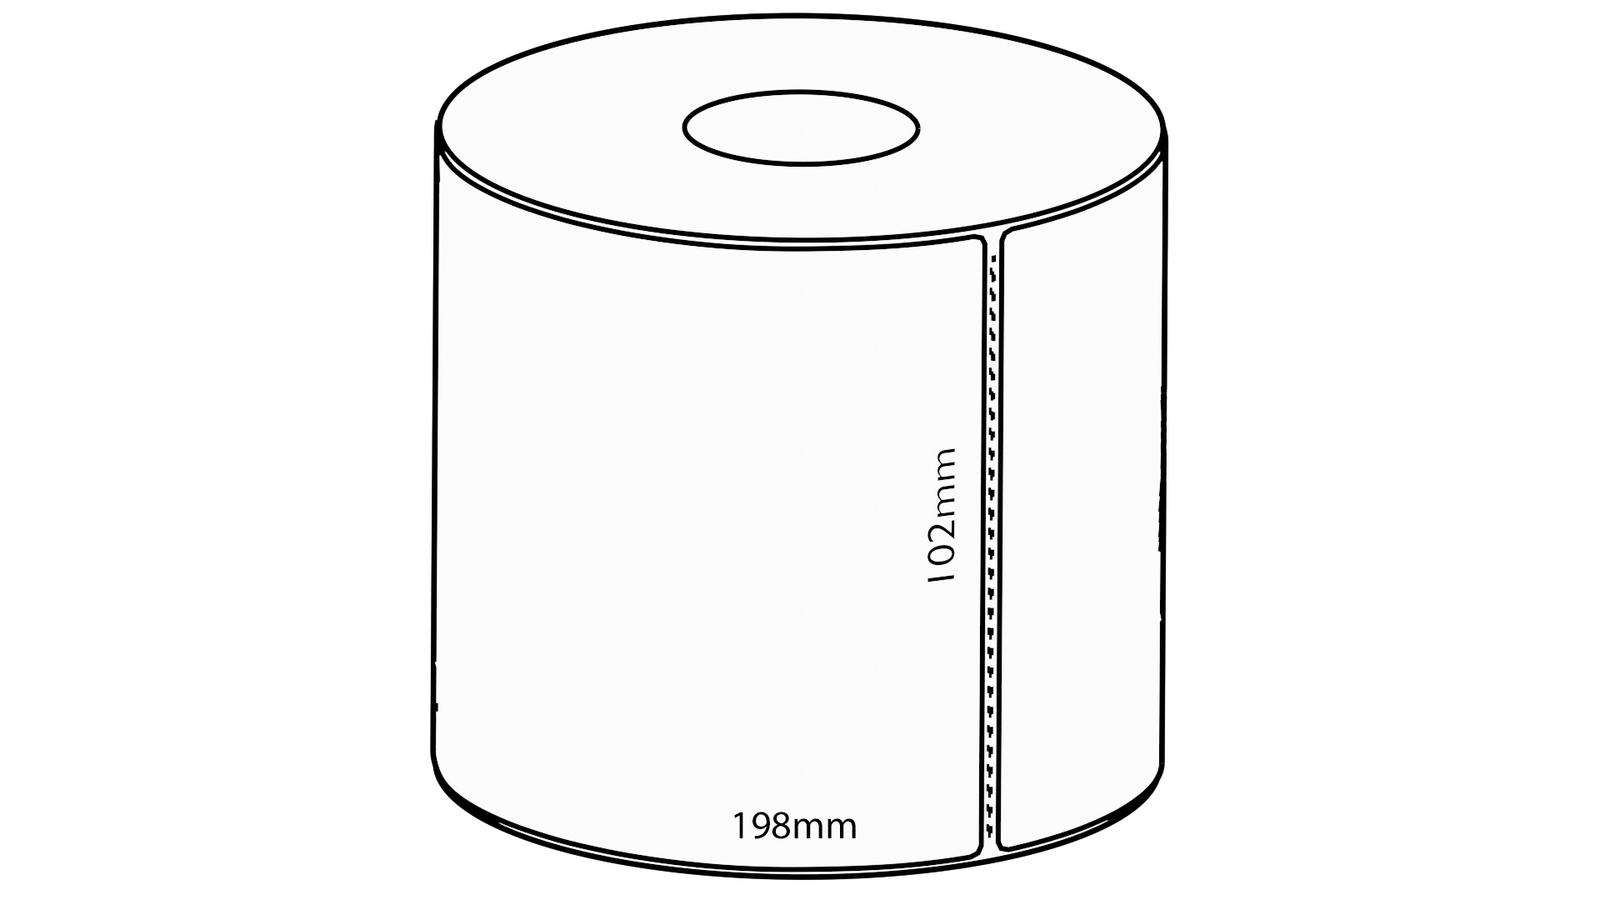 102x198mm Transfer Removable Label, 250 per roll, 38mm core, Perforated